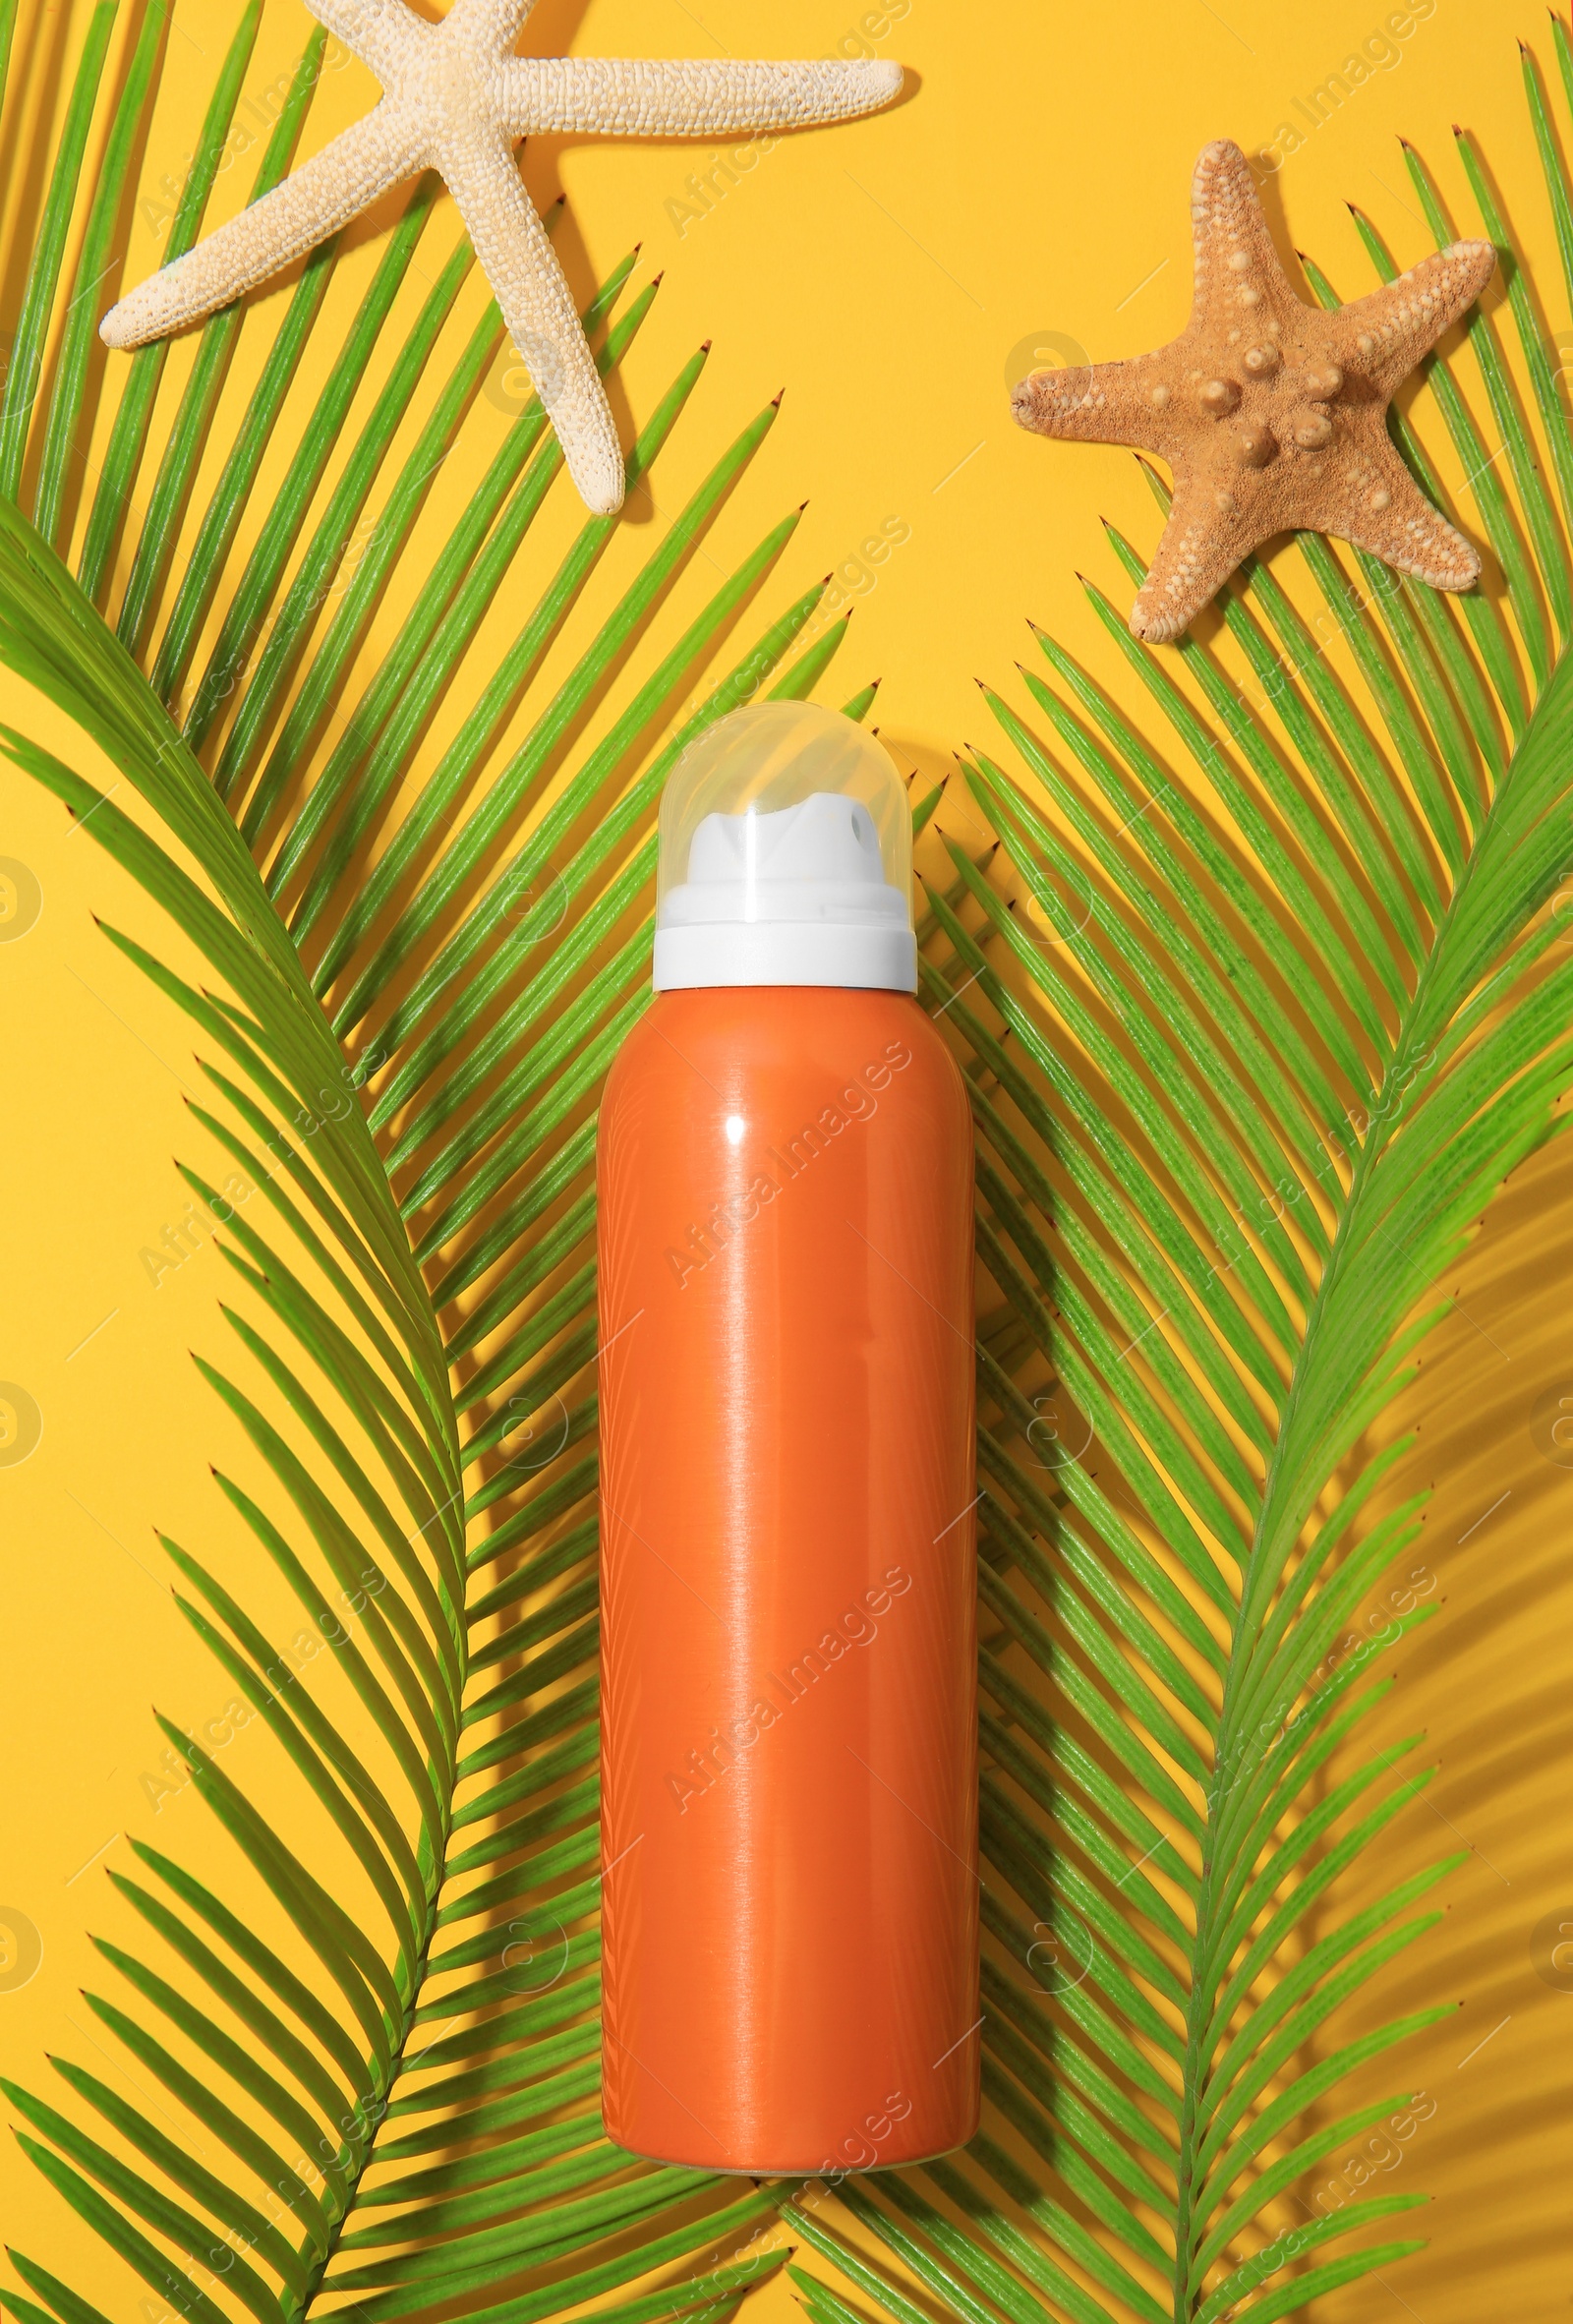 Photo of Sunscreen, sea stars and tropical leaves on yellow background, flat lay. Sun protection care